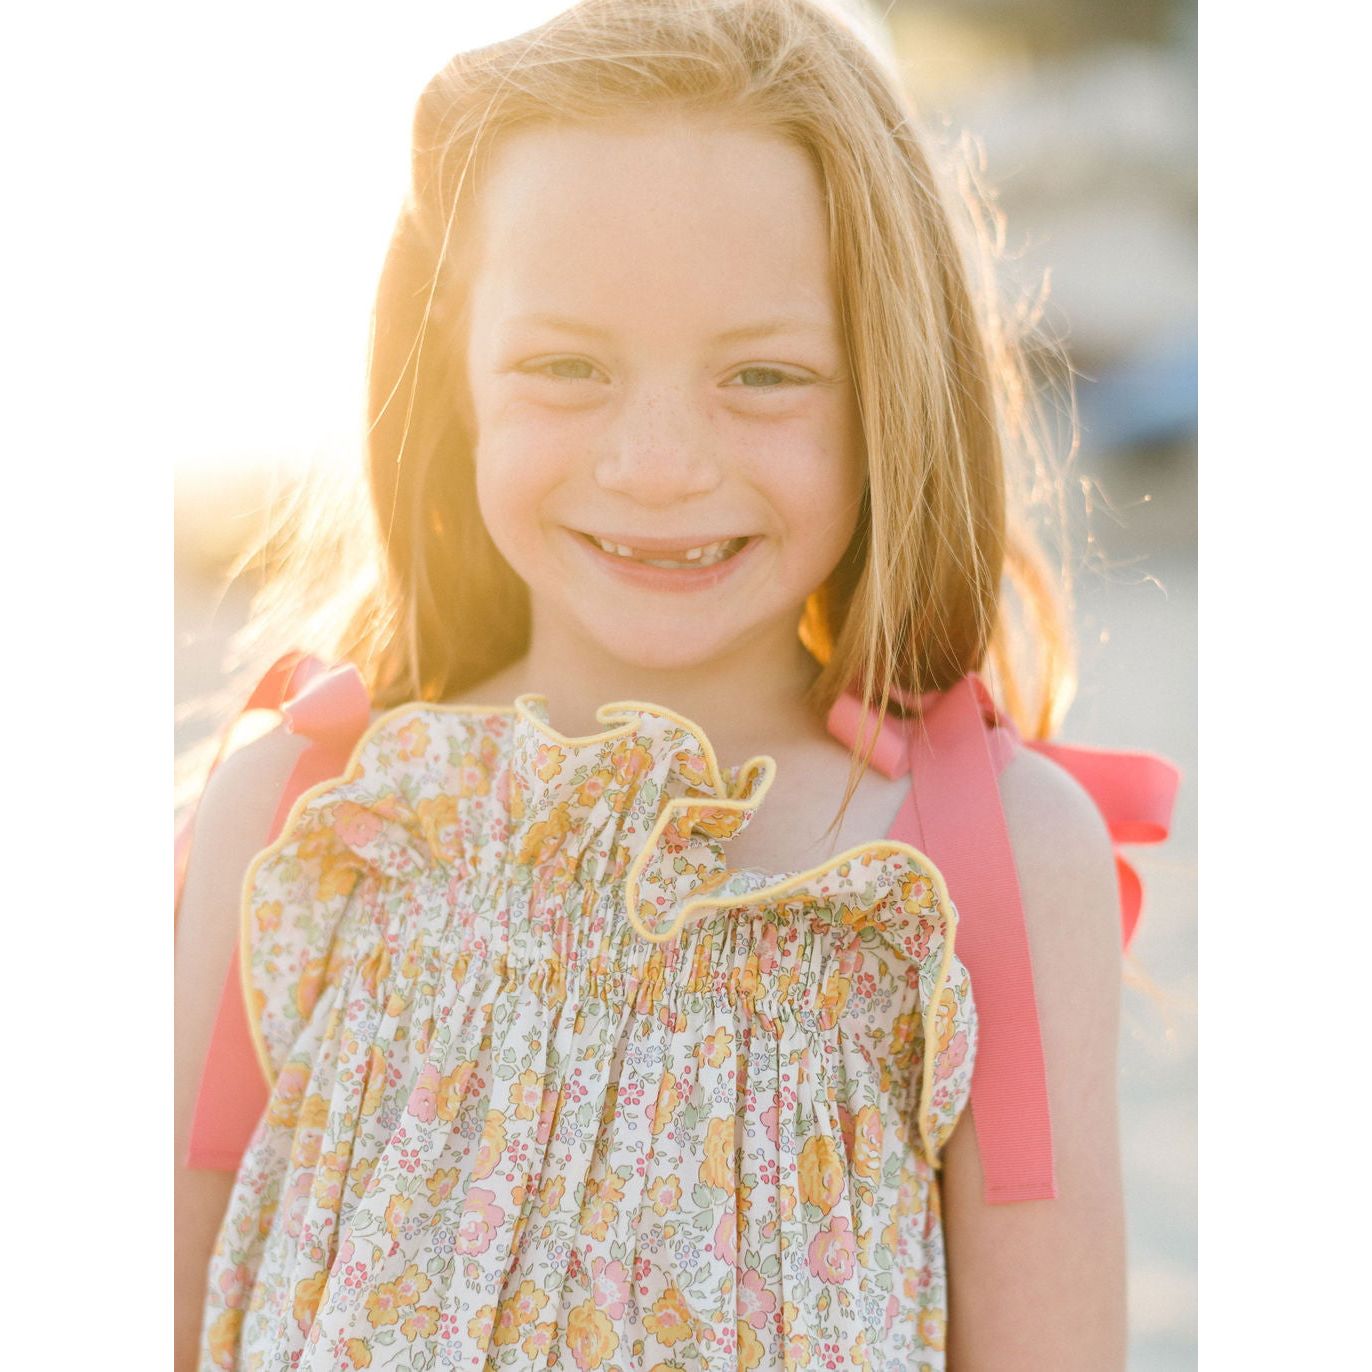 Girls' Jaime Dress in Melon Blossom Floral by Casey Marks